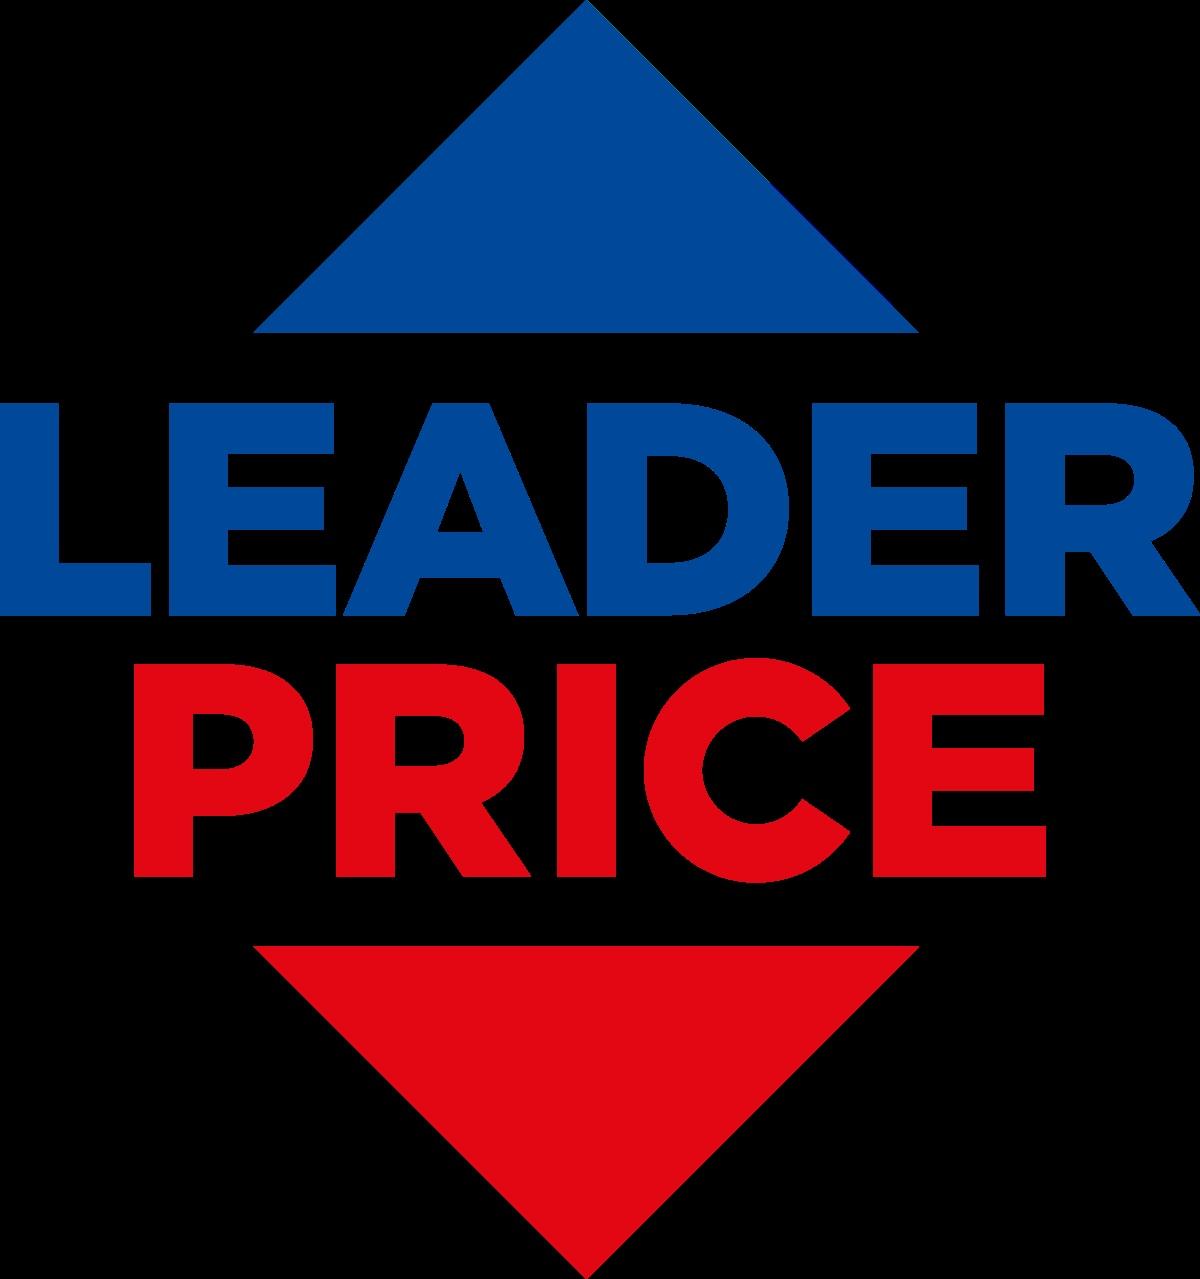 Leader Price Cany Barville